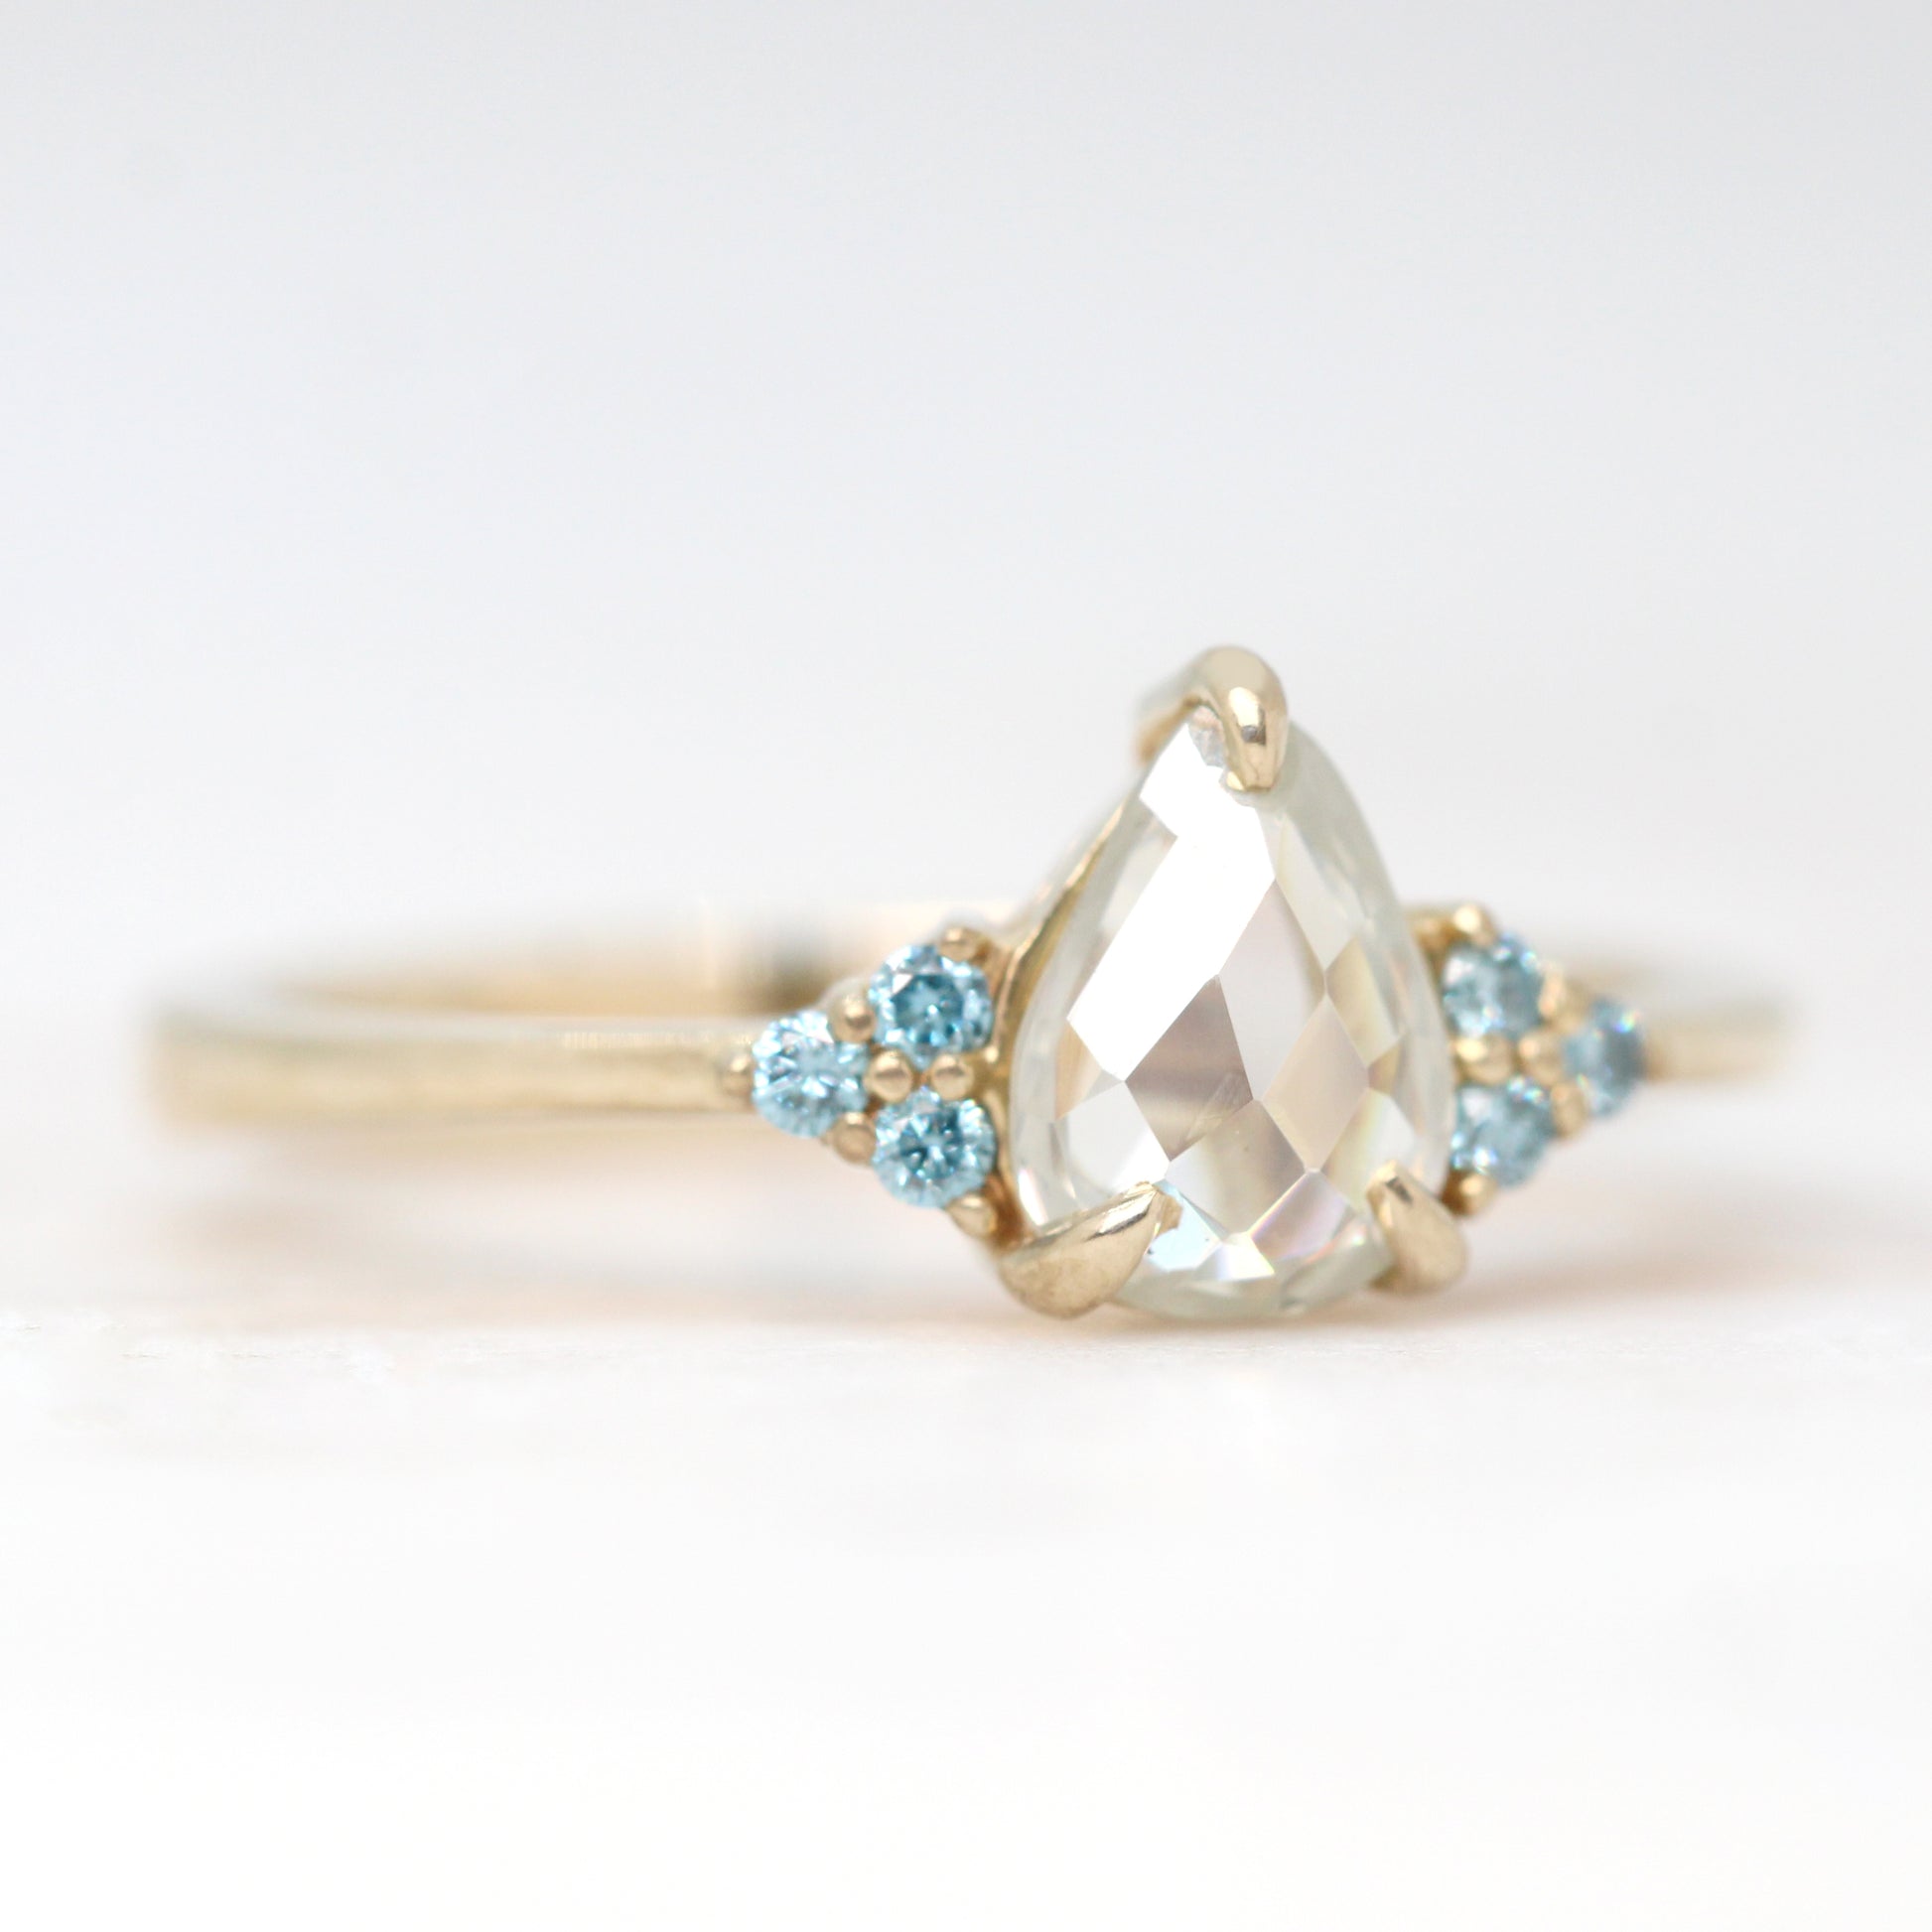 Imogene Ring with a 0.74 Carat Clear Pear Moissanite and Blue Diamond Accents in 14k Yellow Gold - Ready to Size and Ship - Midwinter Co. Alternative Bridal Rings and Modern Fine Jewelry